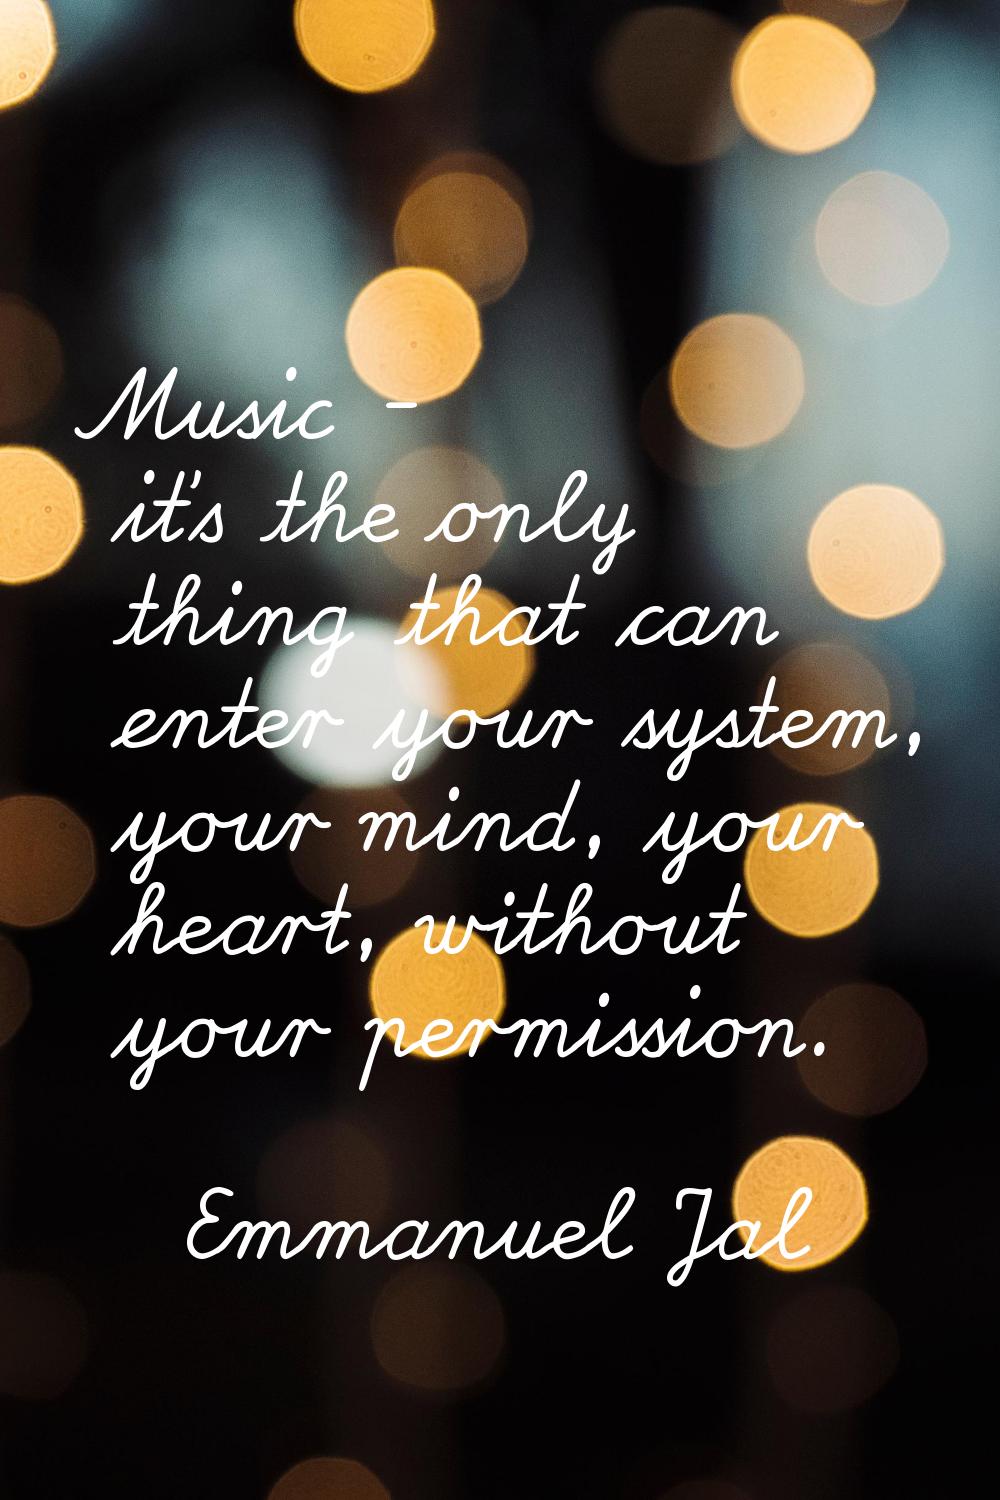 Music - it's the only thing that can enter your system, your mind, your heart, without your permiss